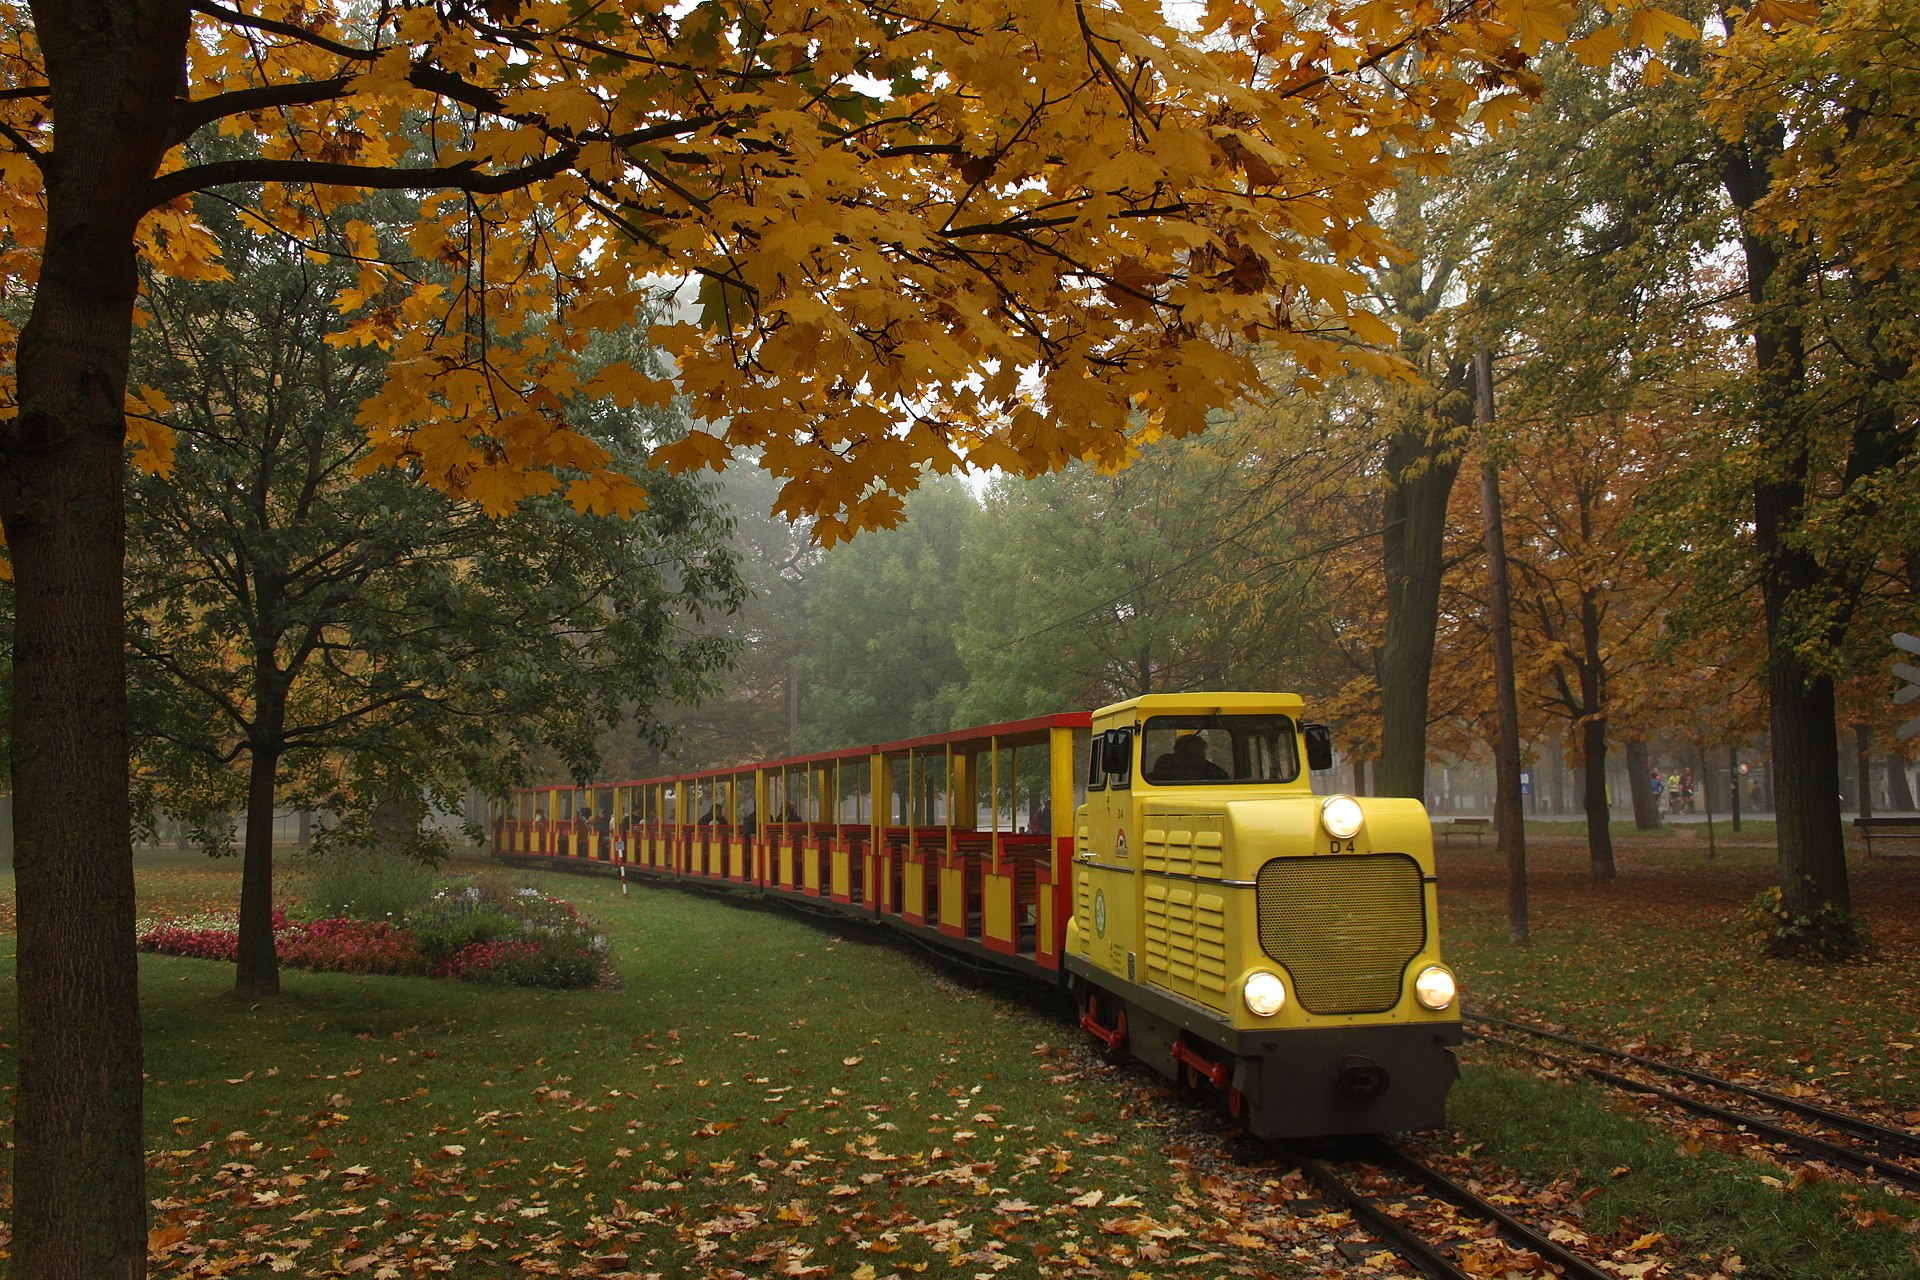 By Tokfo - Own work, Attribution, https://commons.wikimedia.org/w/index.php?curid=25594329, Prater Liliputbahn